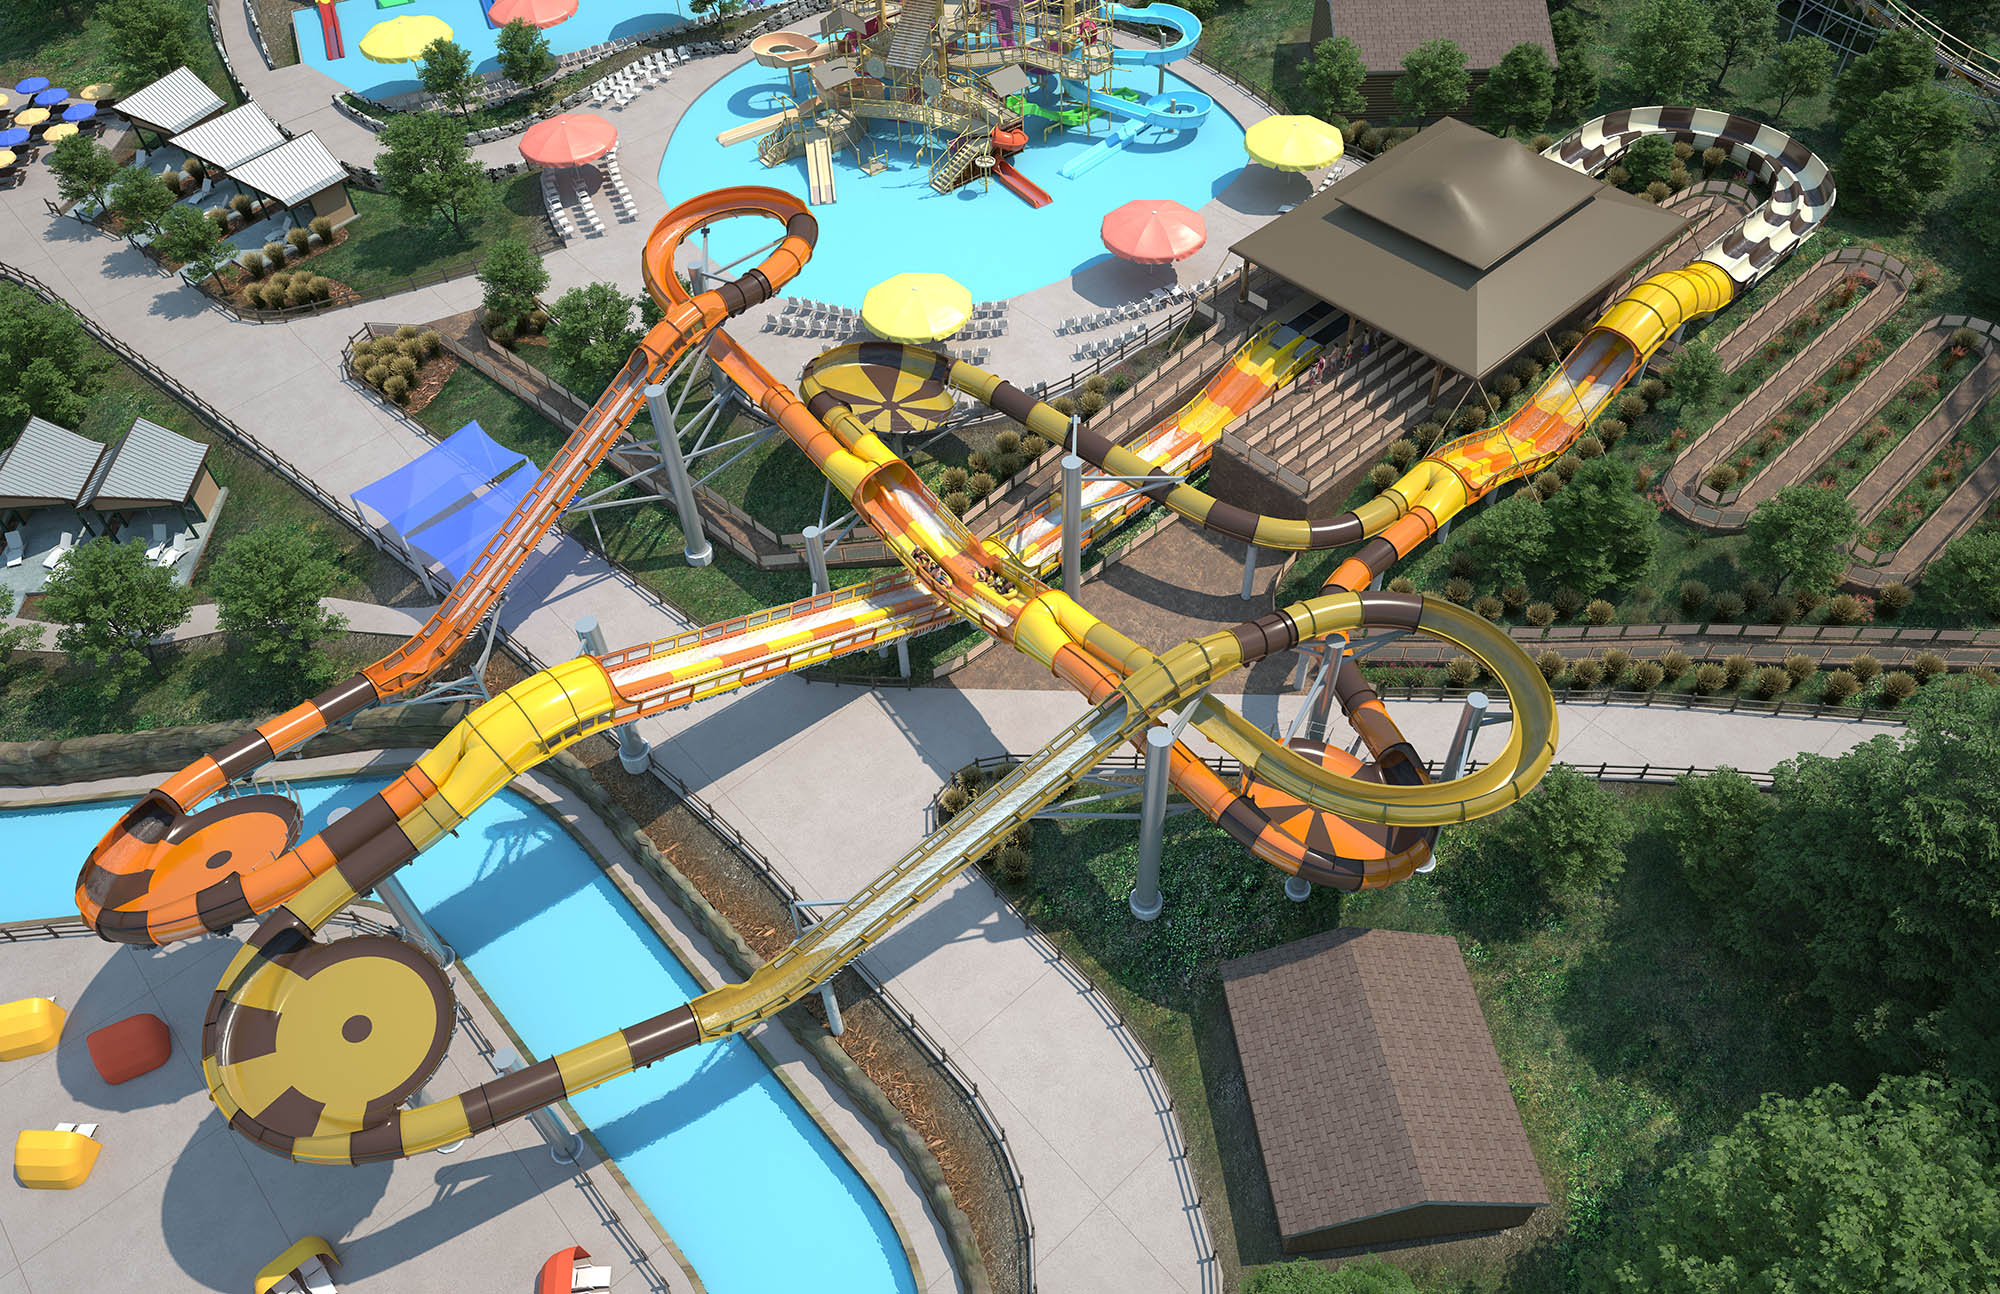 Holiday World announces ‘Cheetah Chase’, world’s first launched water